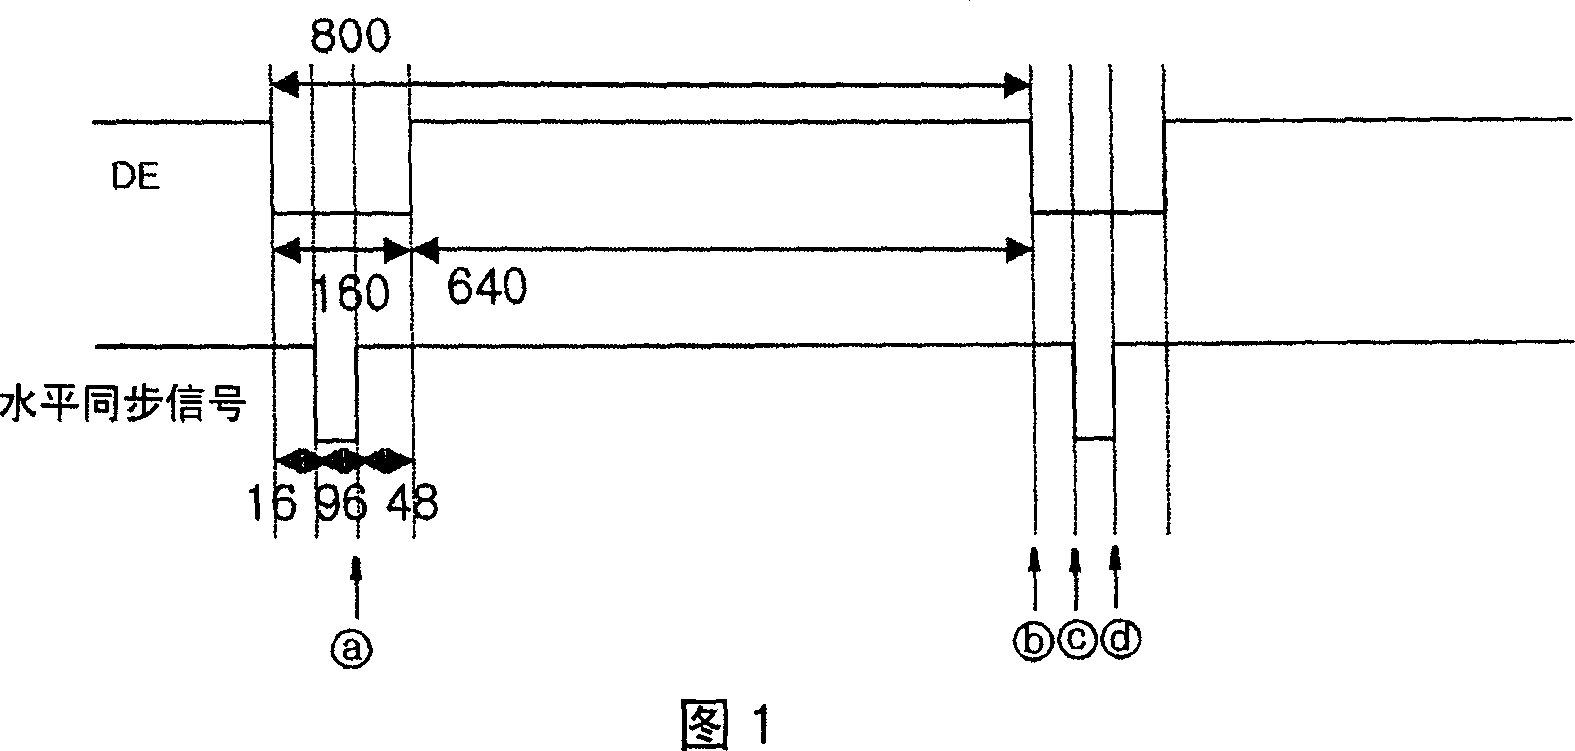 Allowable data signal processing device for interactive digital video system interface